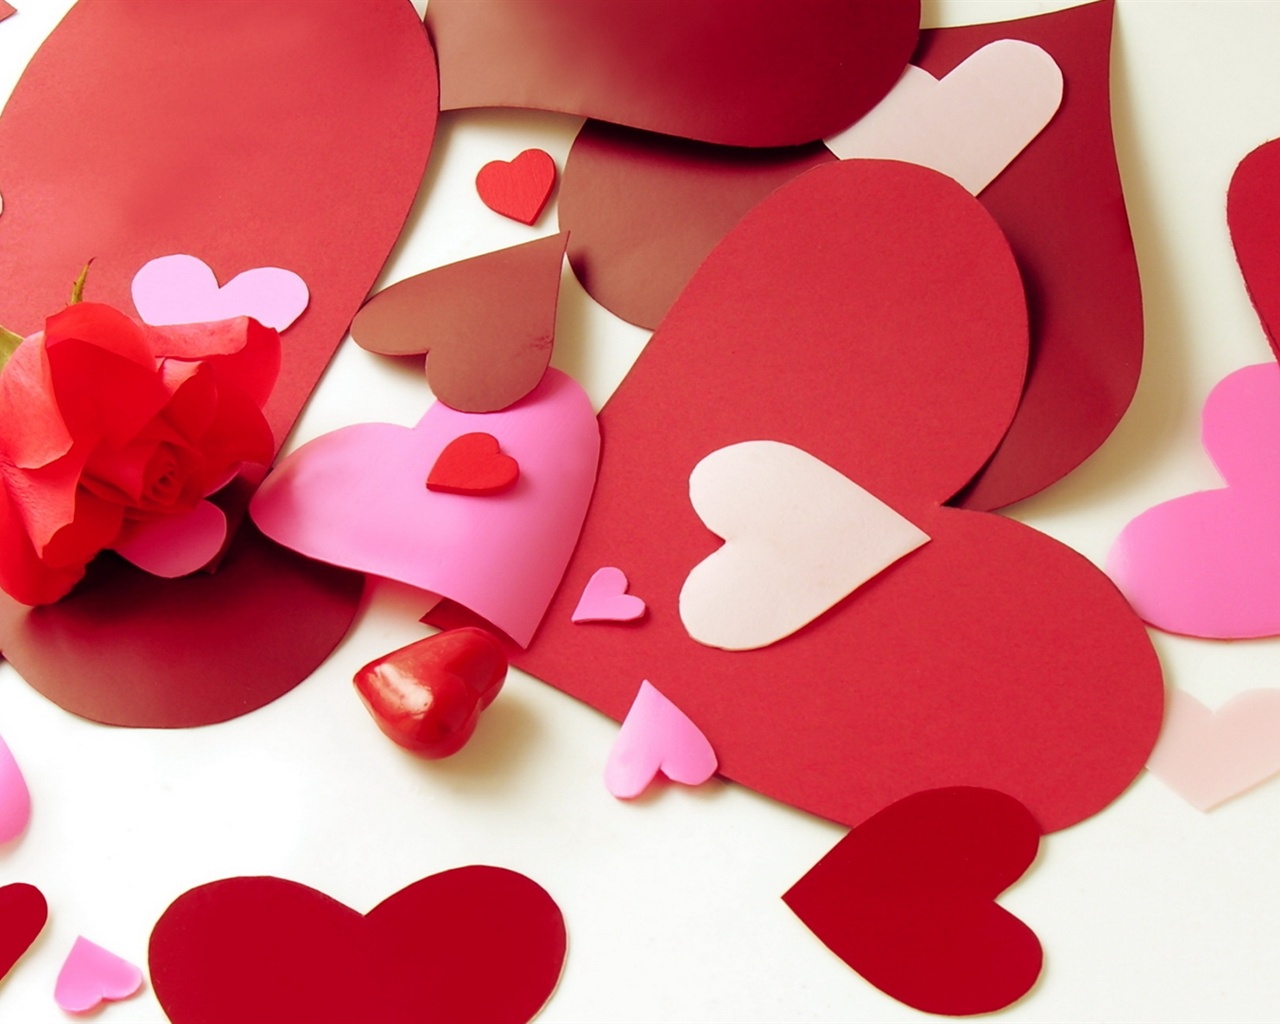 wallpaper dia dos namorados,heart,valentine's day,red,pink,love